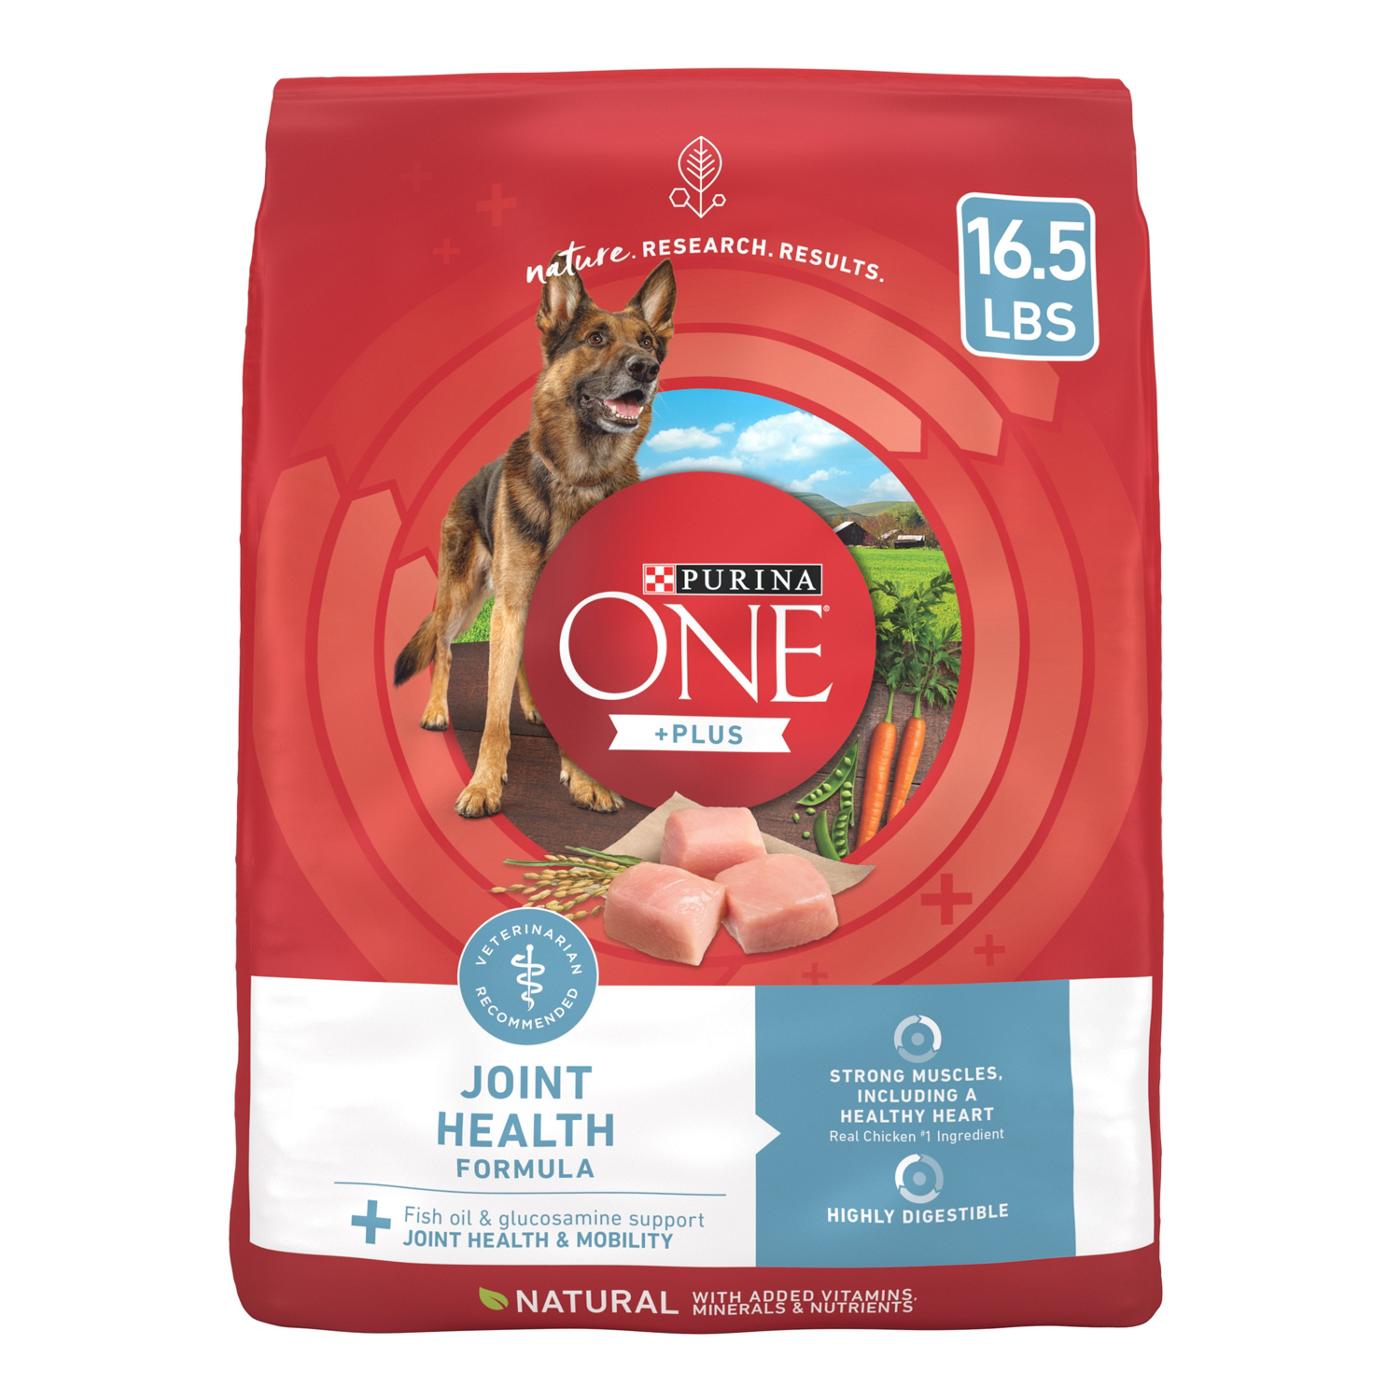 Purina ONE Purina ONE Plus Joint Health Formula Natural With Added Vitamins, Minerals and Nutrients Dry Dog Food; image 1 of 6